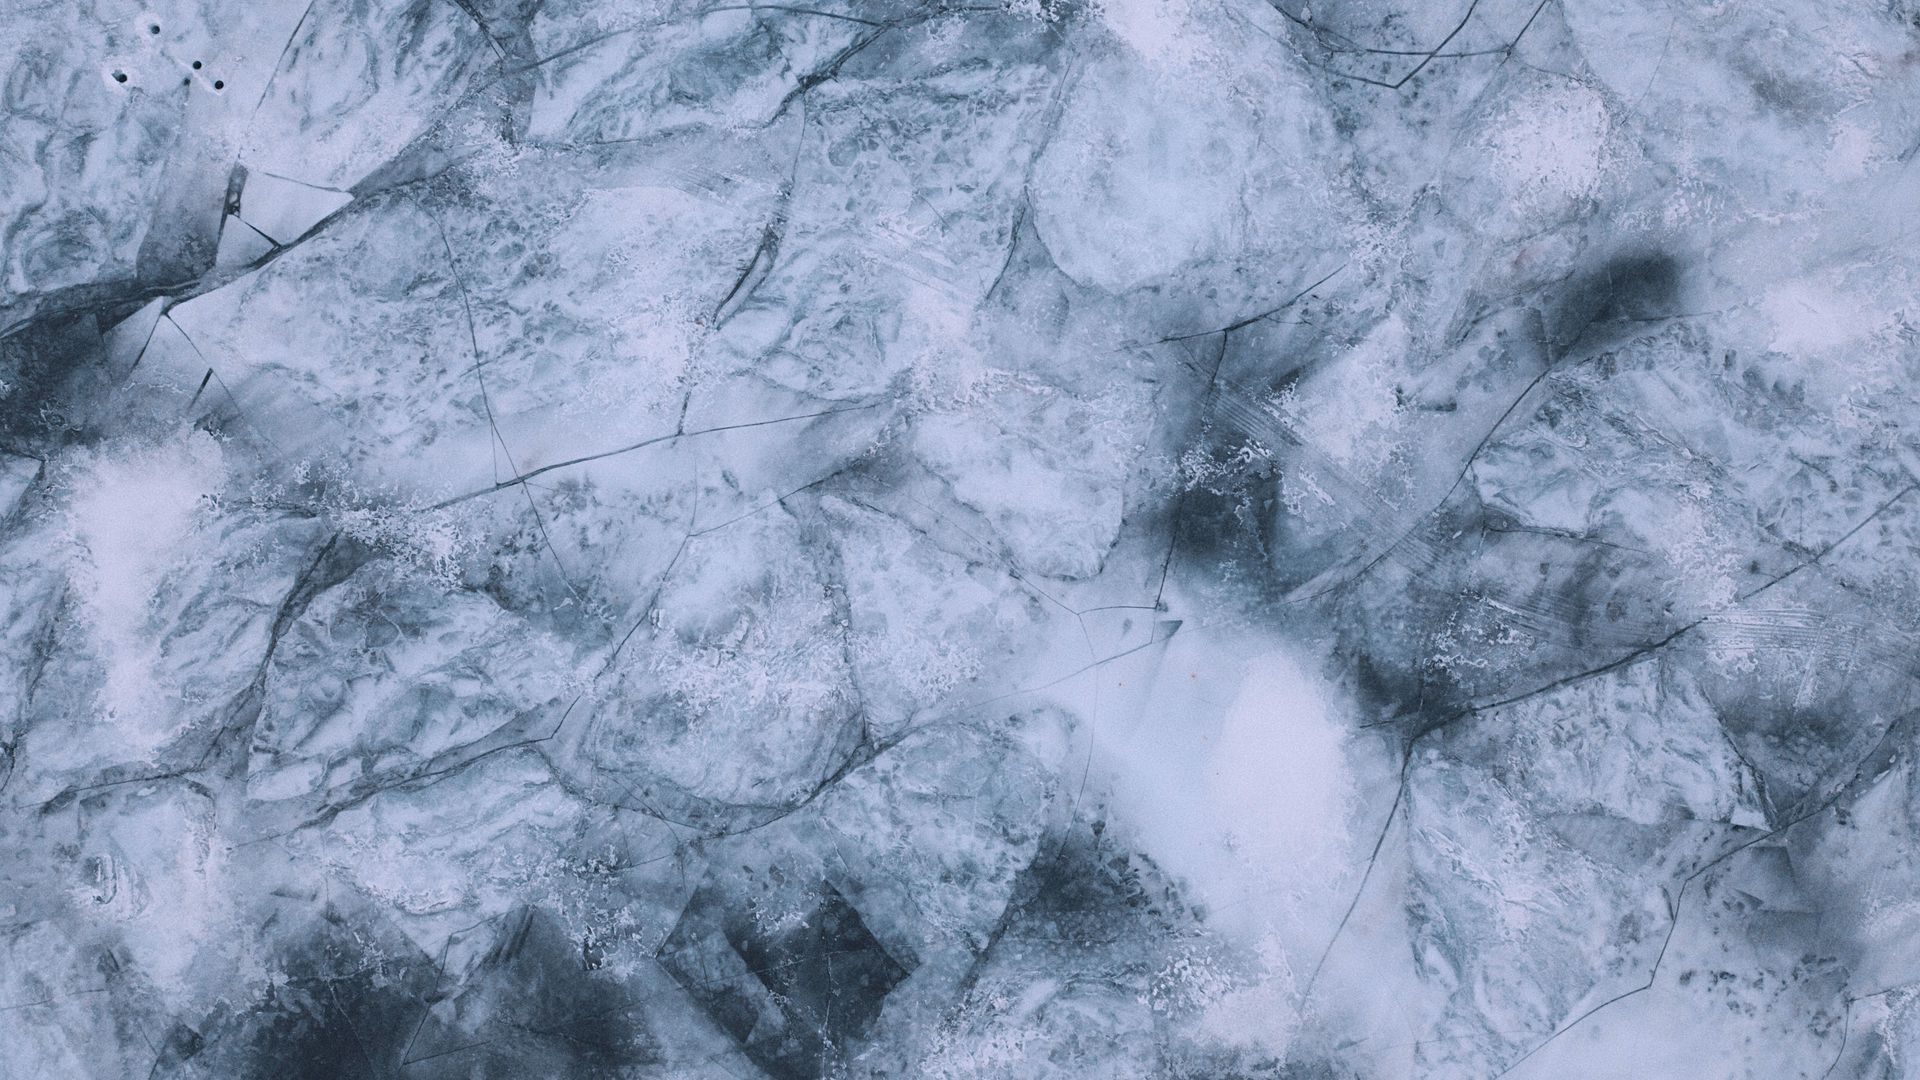 Download wallpaper 1920x1080 ice, frozen, snow, texture full hd, hdtv, fhd, 1080p HD background